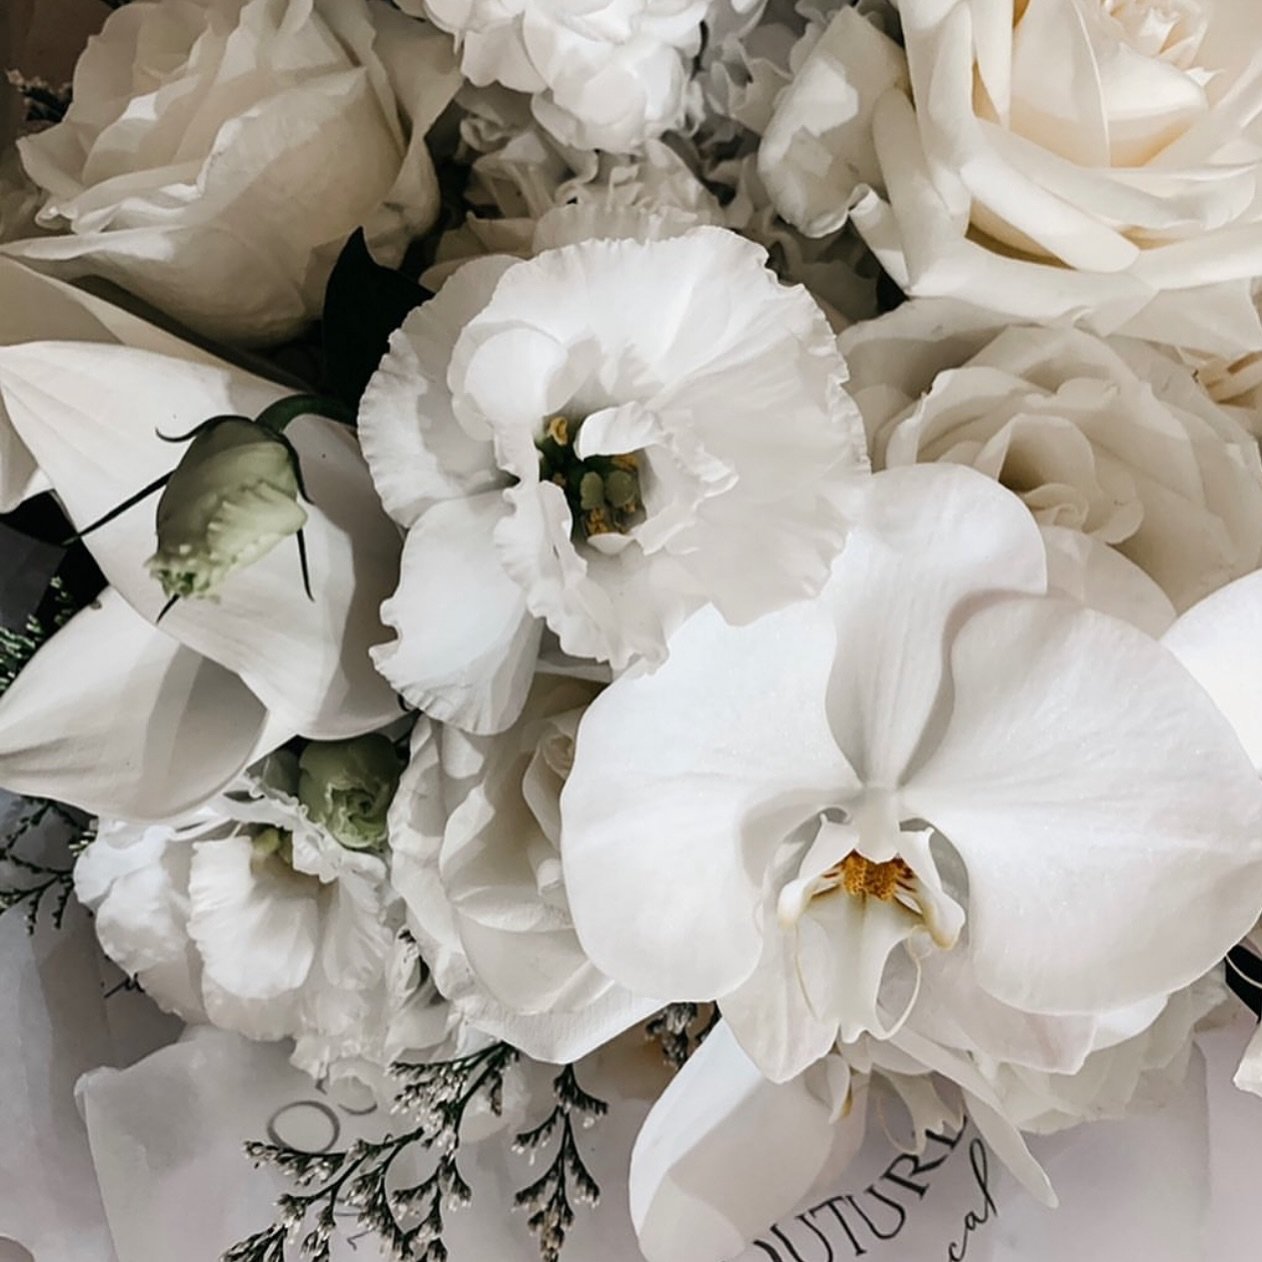 Now I&rsquo;m not usually one for following trends (I&rsquo;m more about staying true to my own creative style and vision of beauty) but so far, this year&rsquo;s wedding trends have not disappointed...
&amp; although they change like the seasons-the